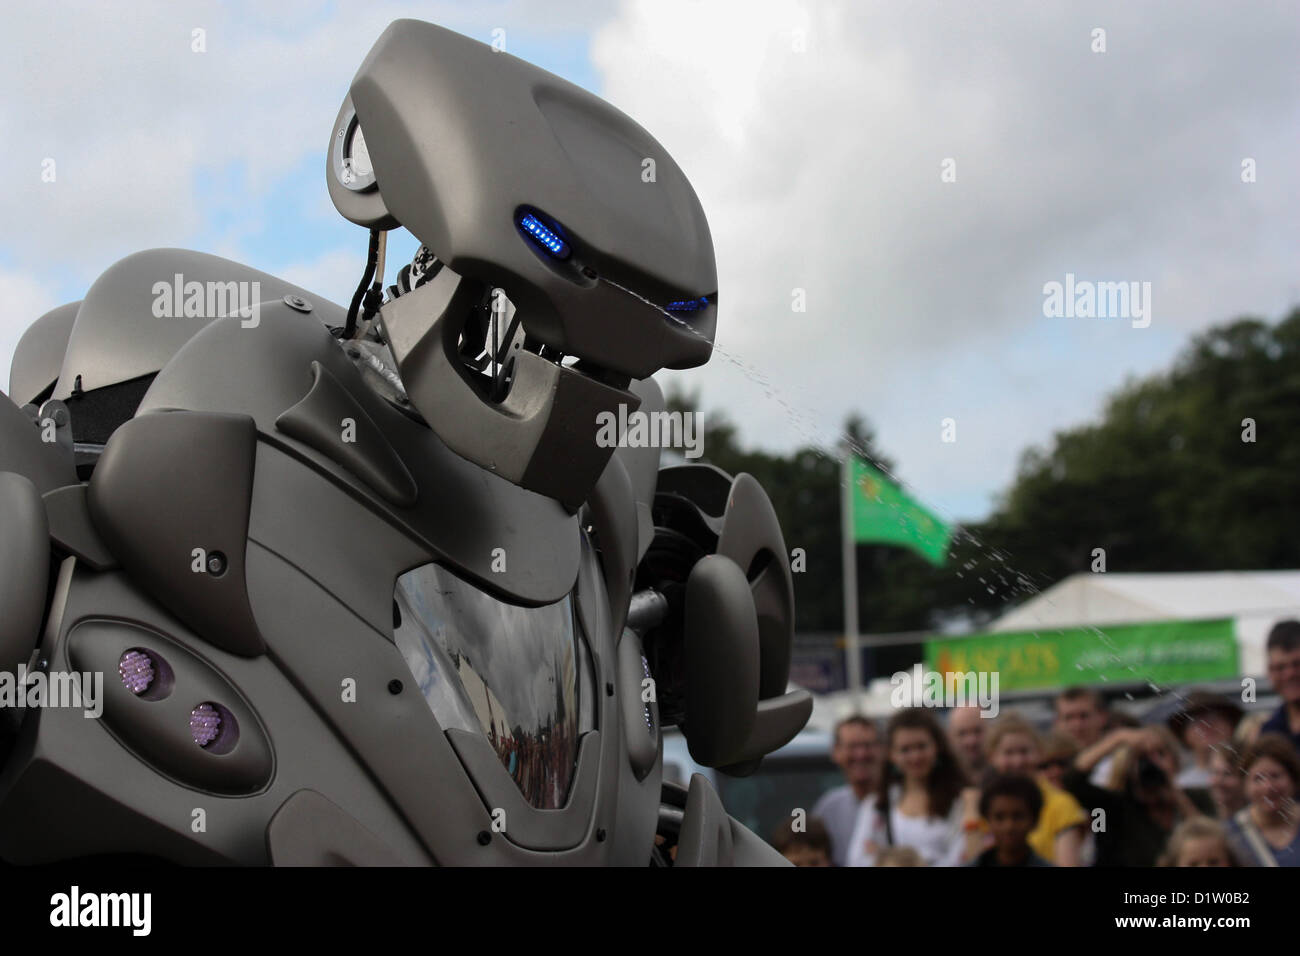 Titan the Robot at The Romsey Show Hampshire England Uk Stock Photo